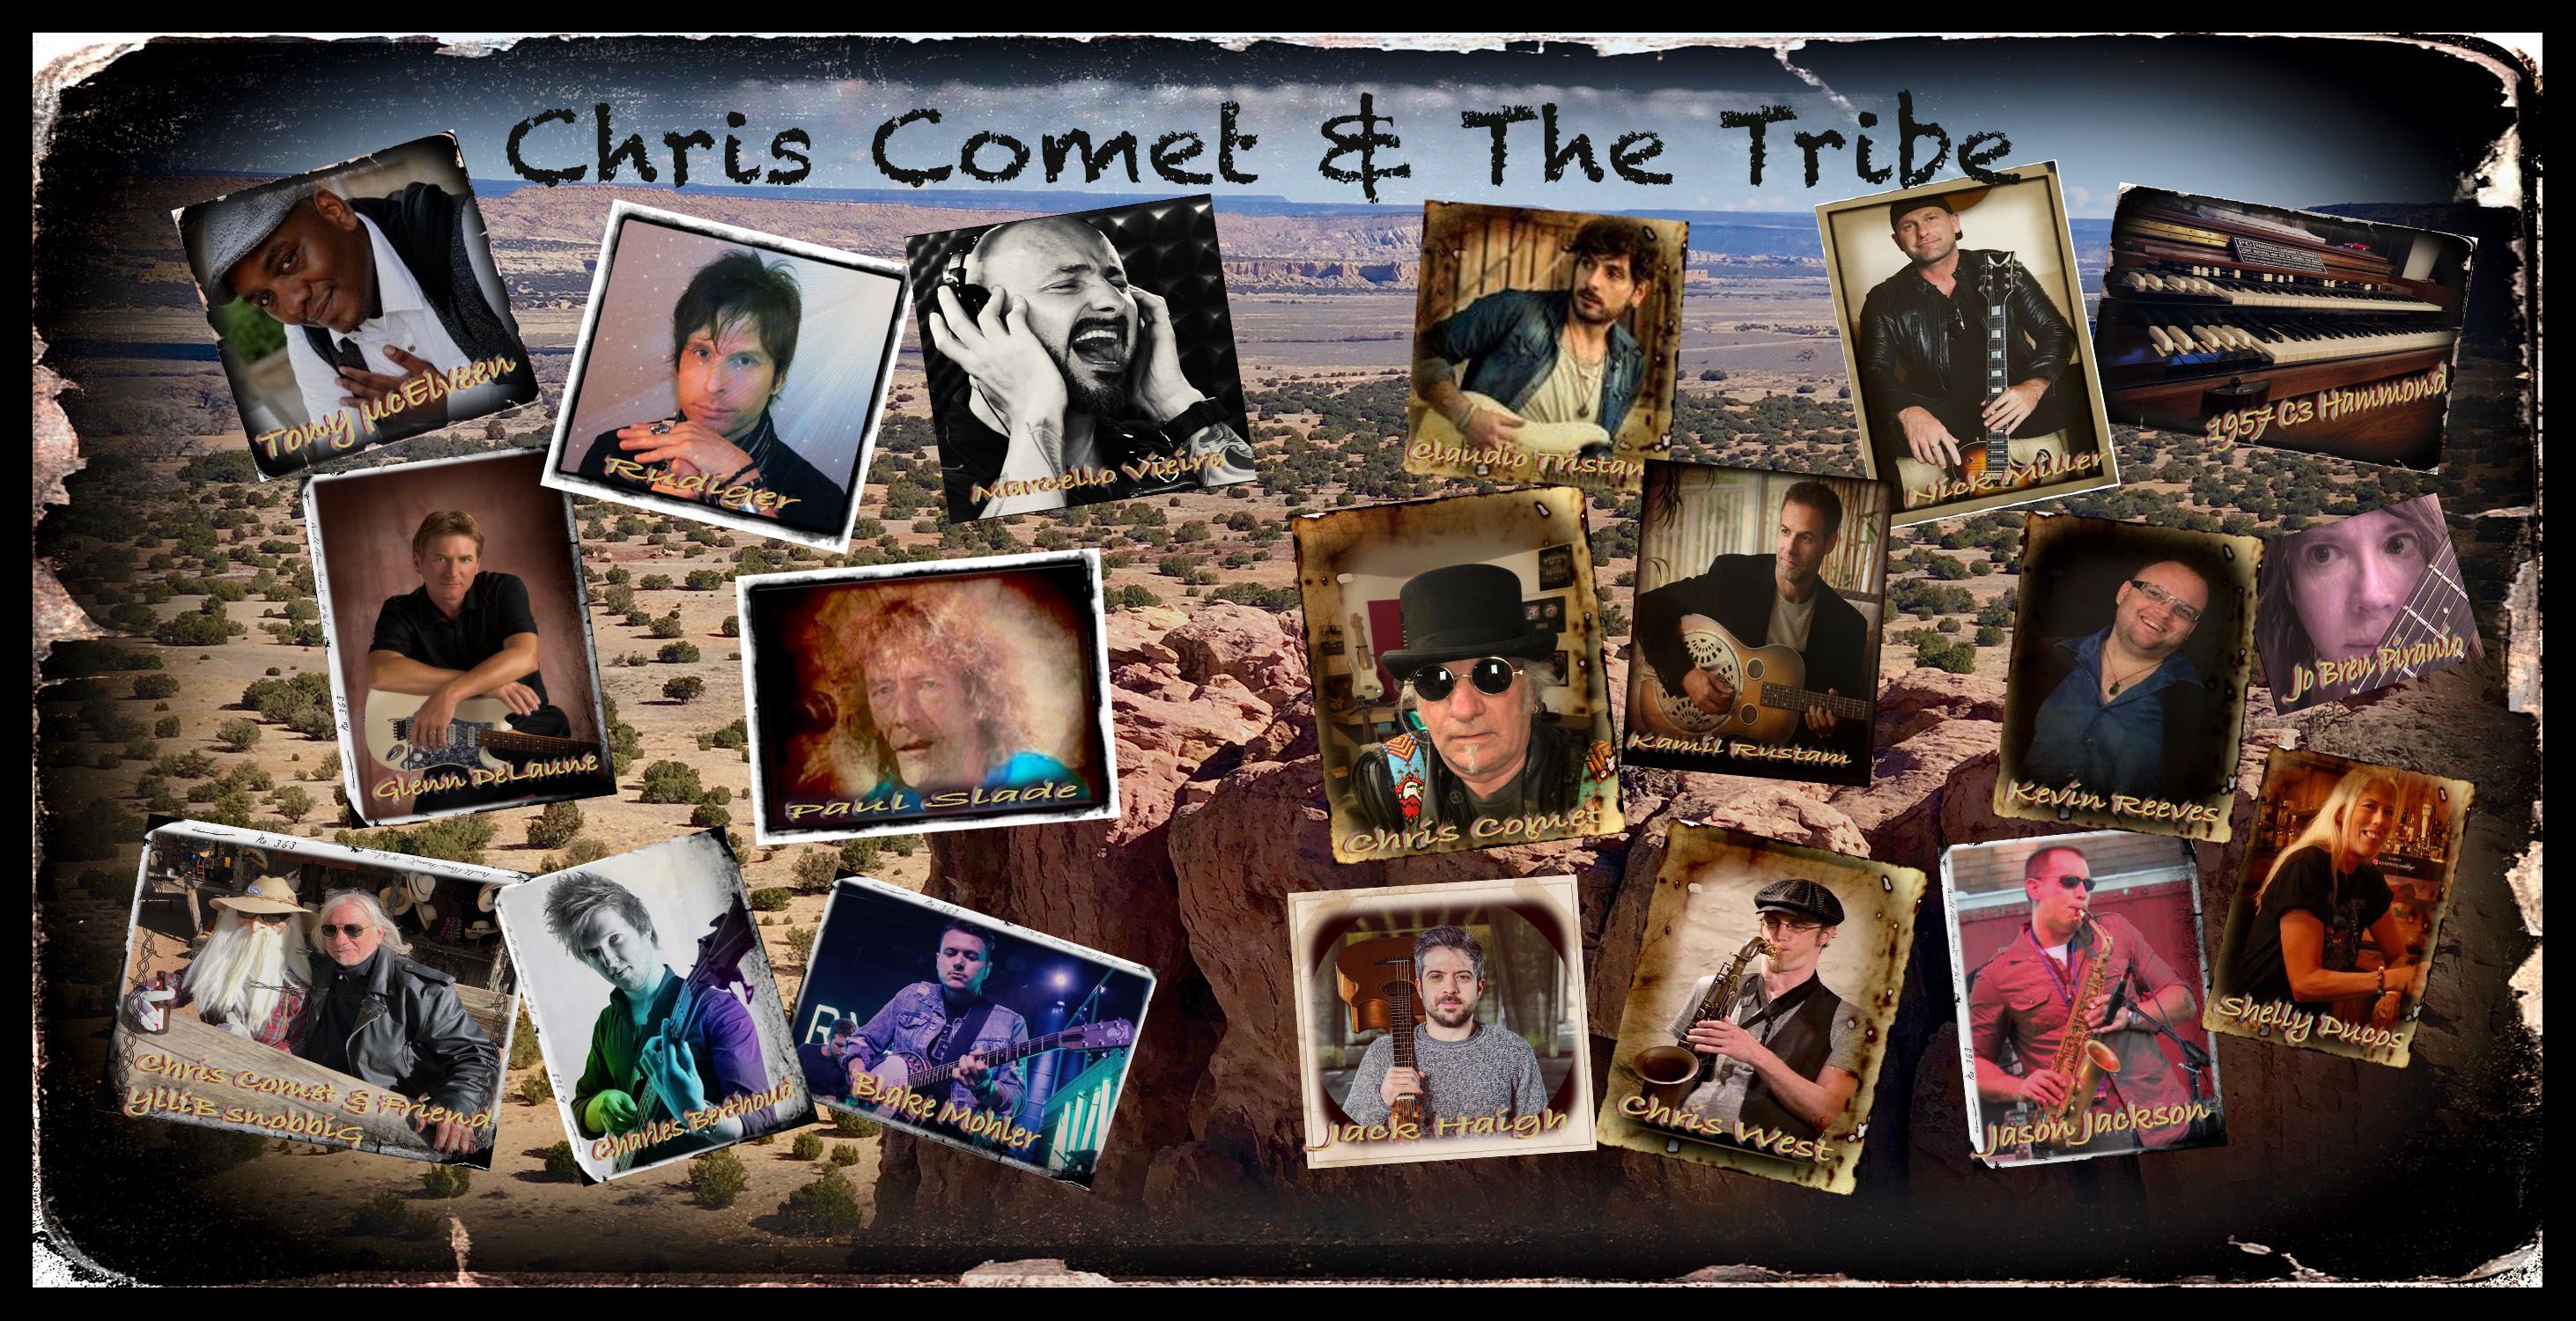 Chris Comet and The Tribe